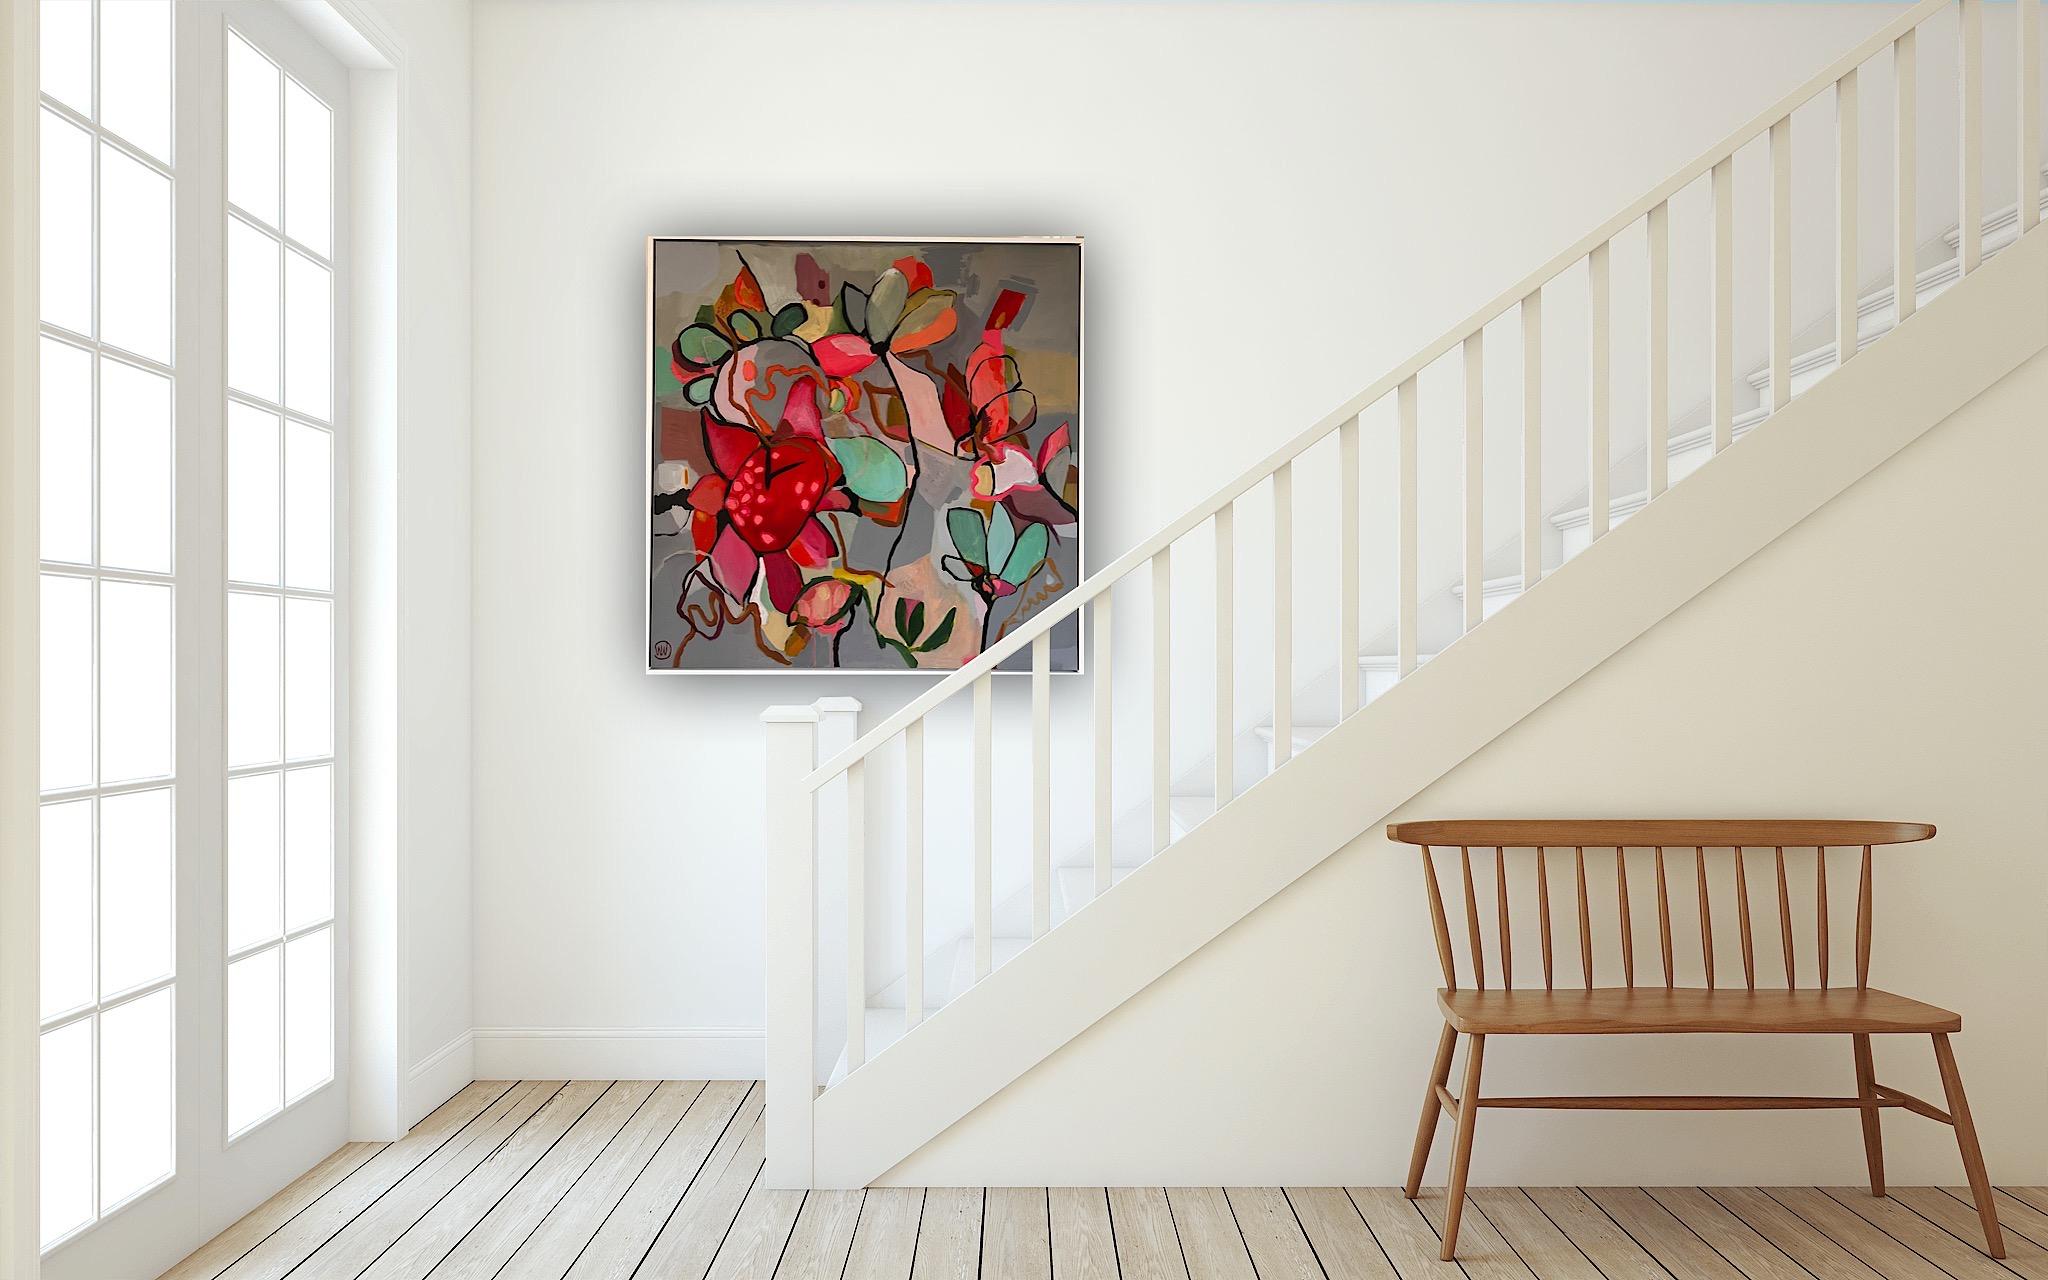 Ophelia, floral art, abstract art, affordable art, original art, red/green art - Painting by Wendi Weller